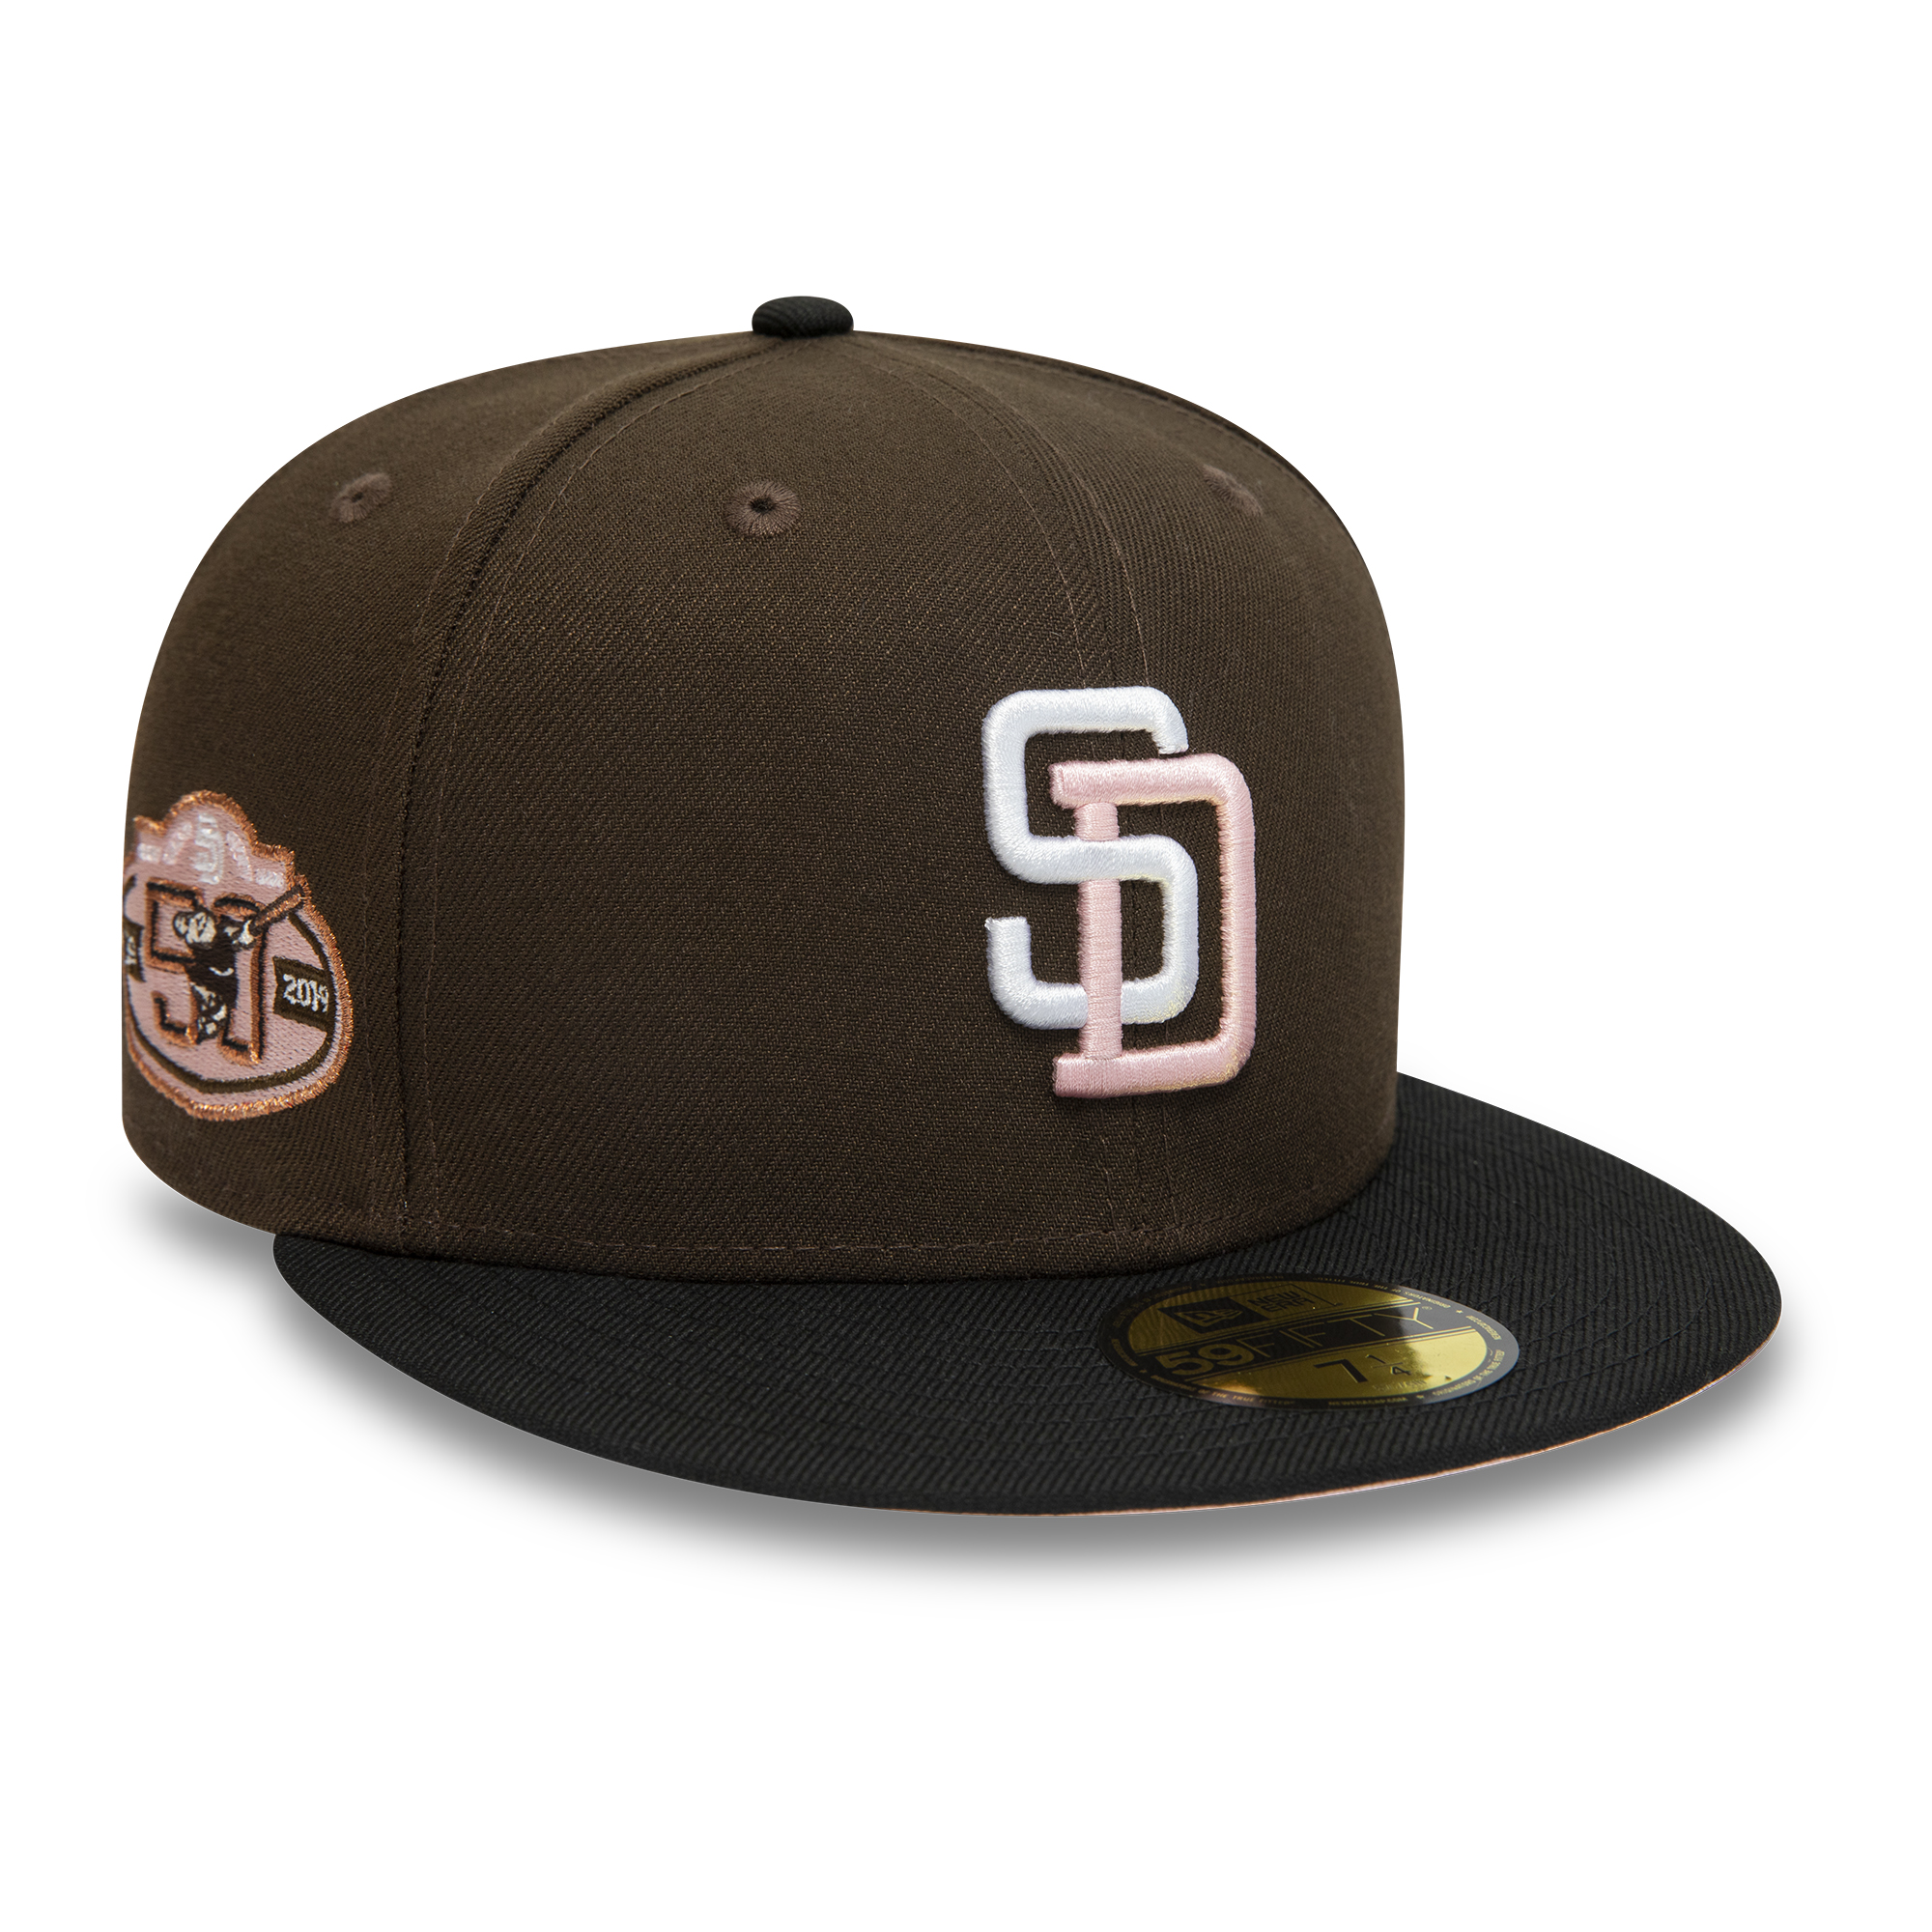 MLB NEW ERA PATCHED FITTED HATS SAN DIEGO PADRES  CityLineUSA